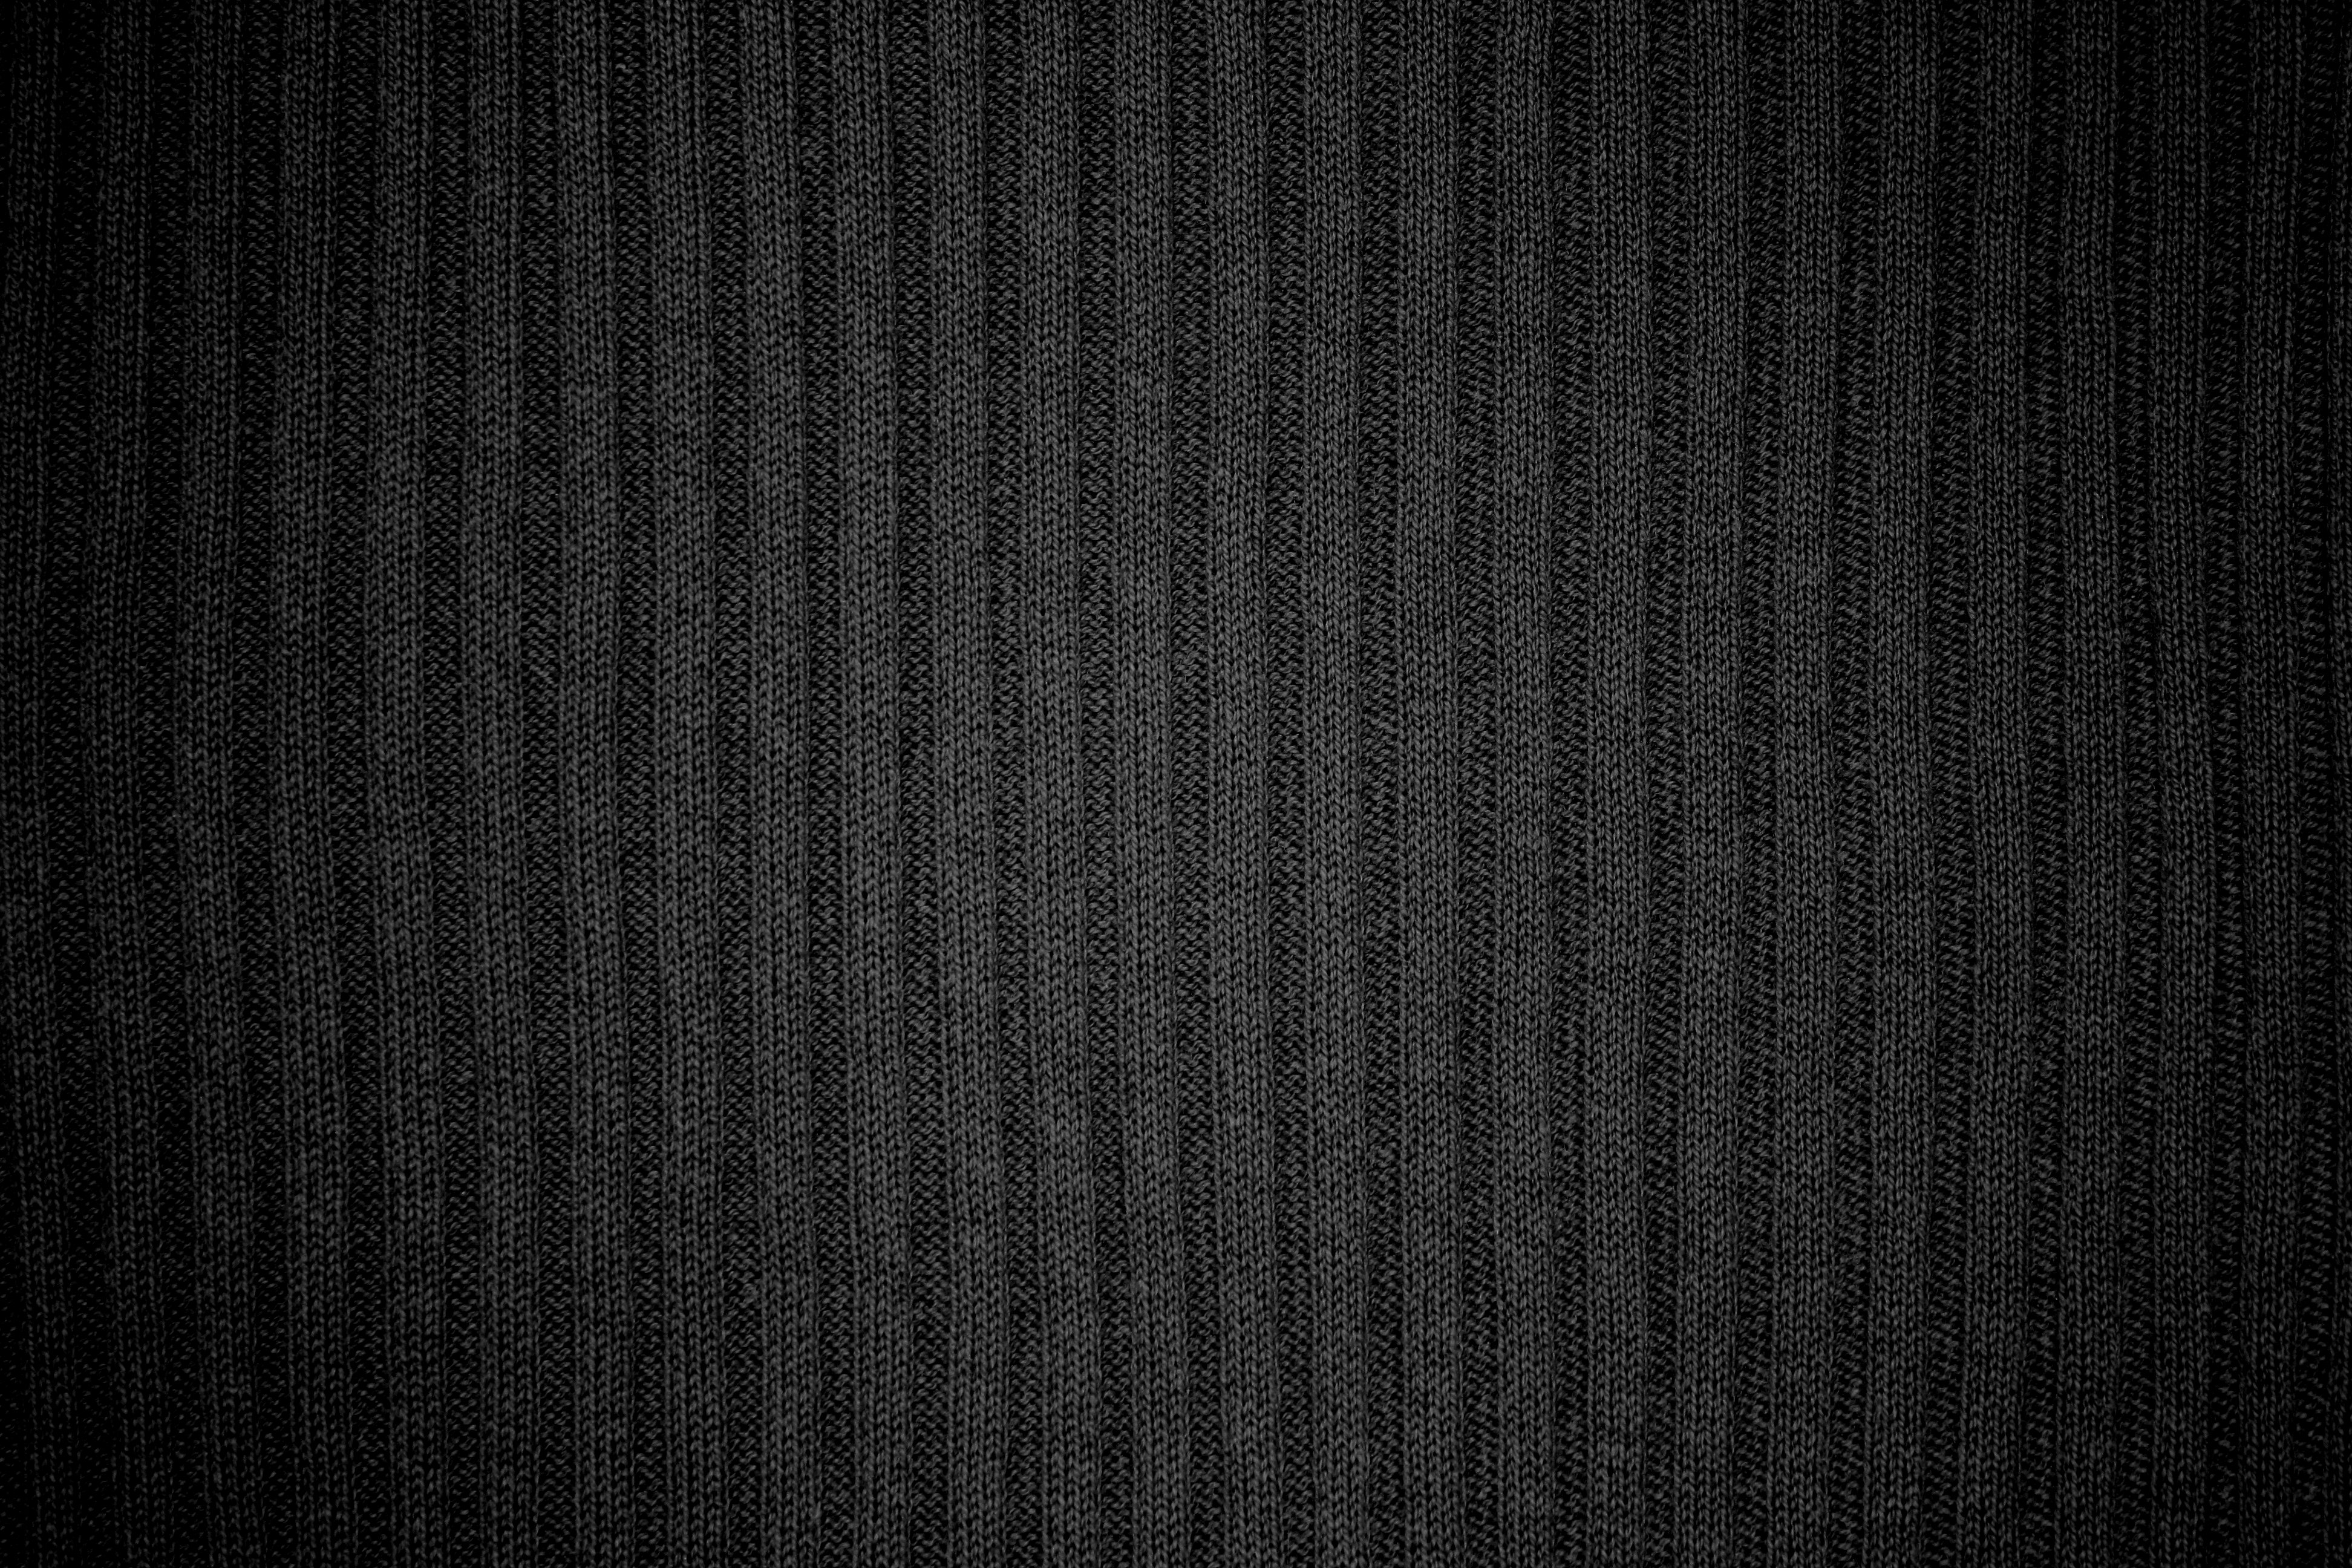 Black Ribbed Knit Fabric Texture Picture | Free Photograph | Photos ...